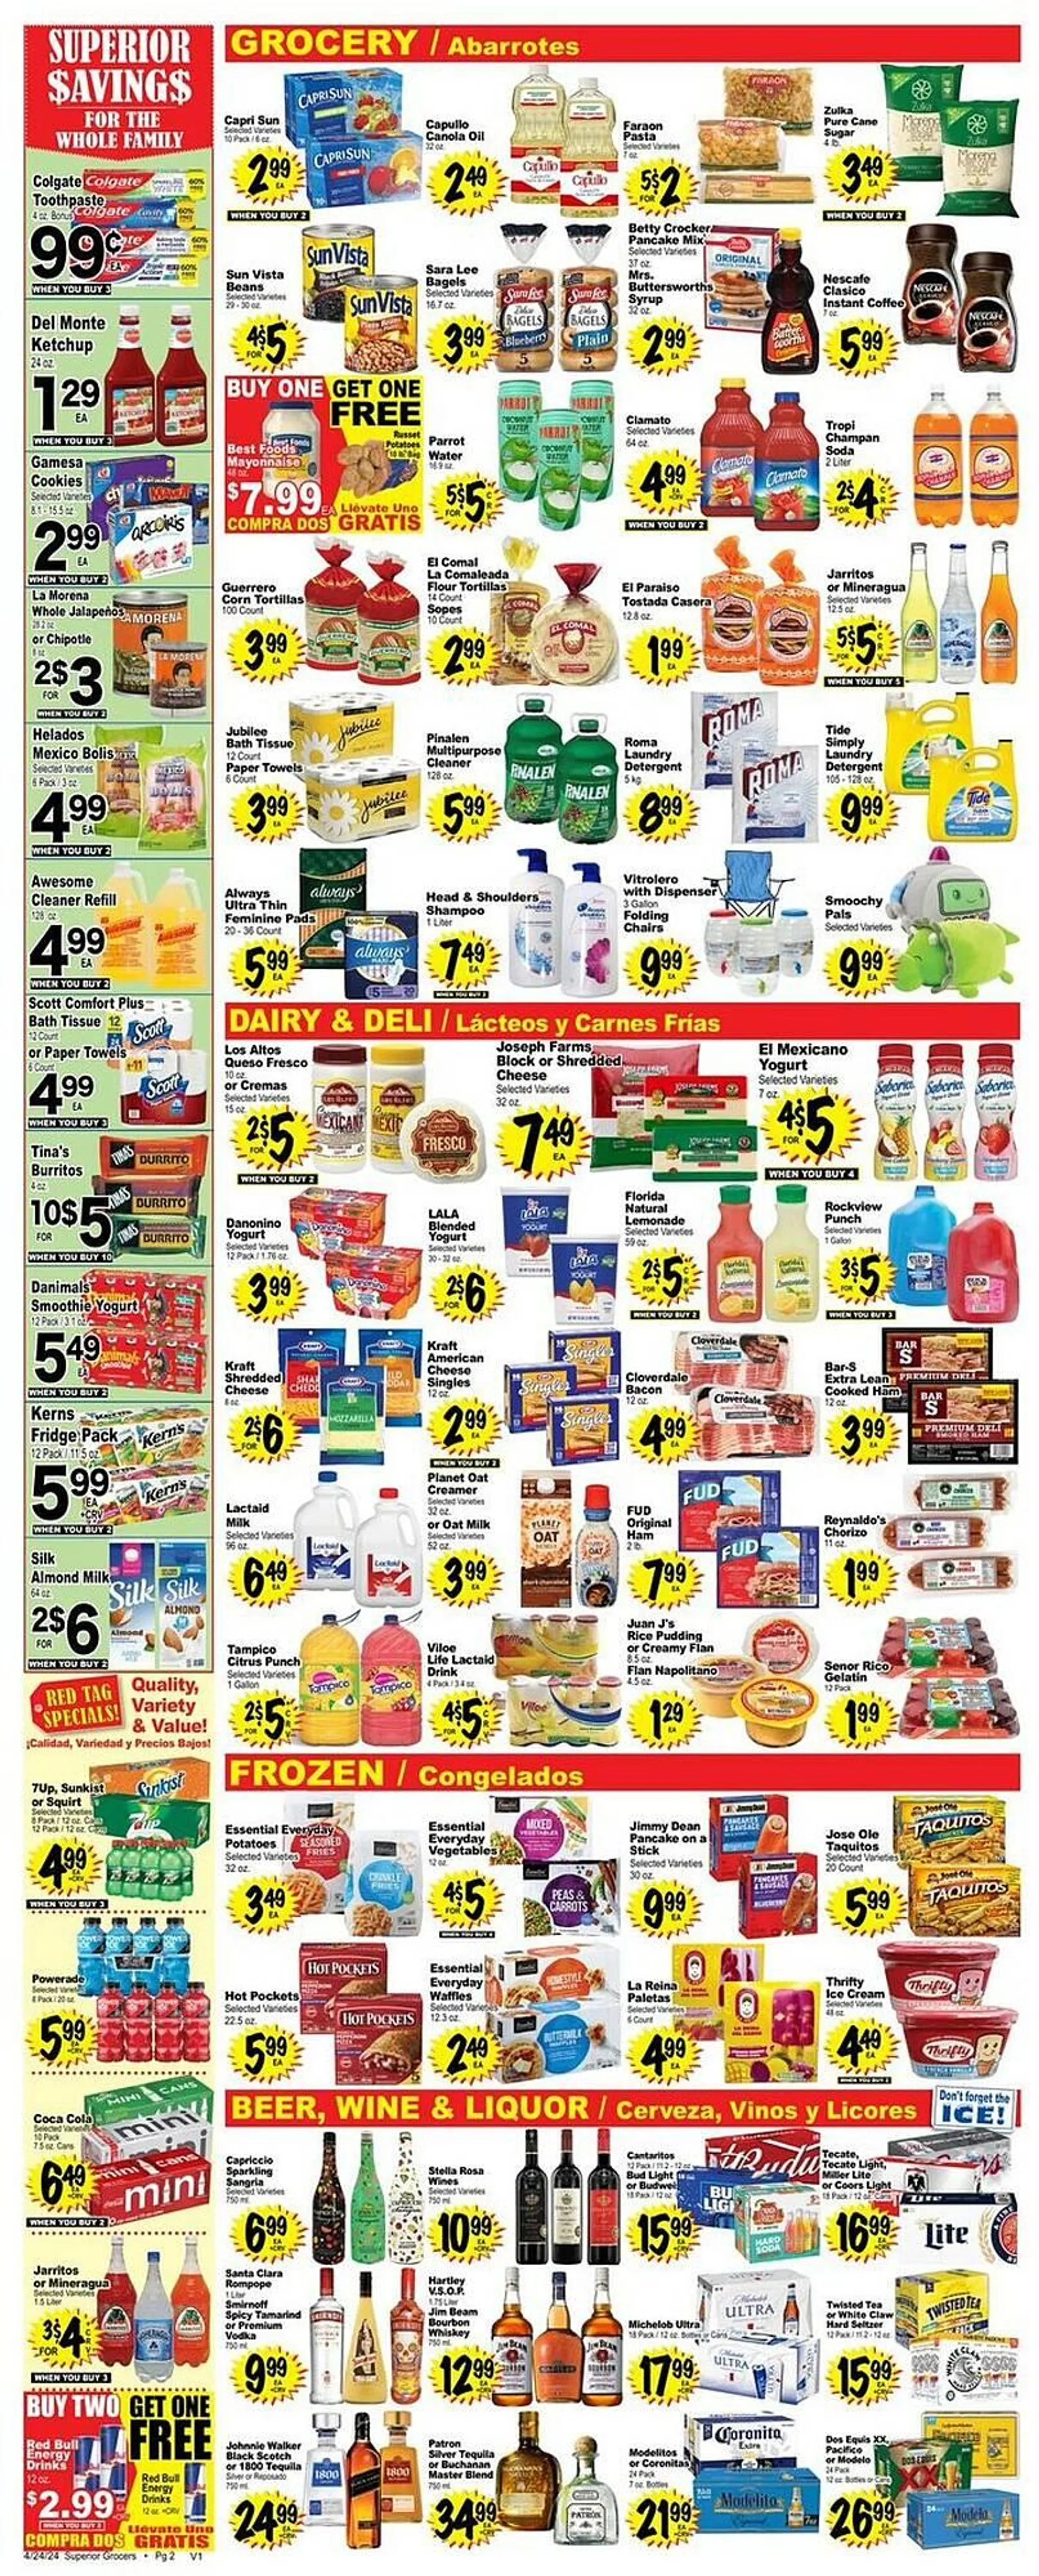 Superior Grocers Weekly Ad - 2